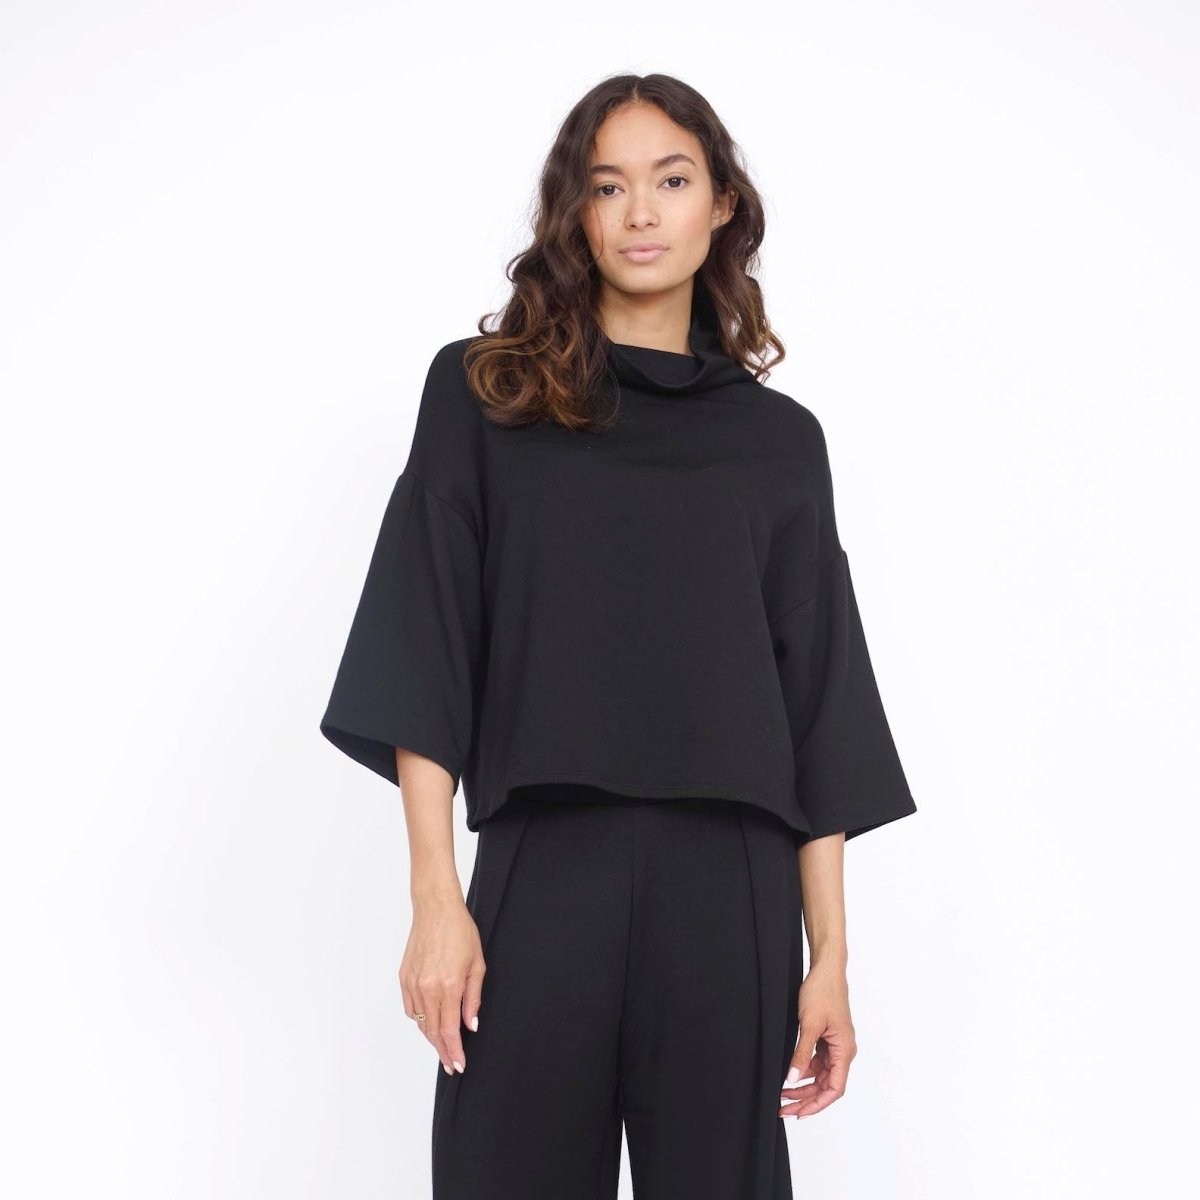 Loose fitting top with 3/4 sleeve and draped neck. The Bucket Sweater in Black is designed by Corinne and made in Los Angeles, CA.